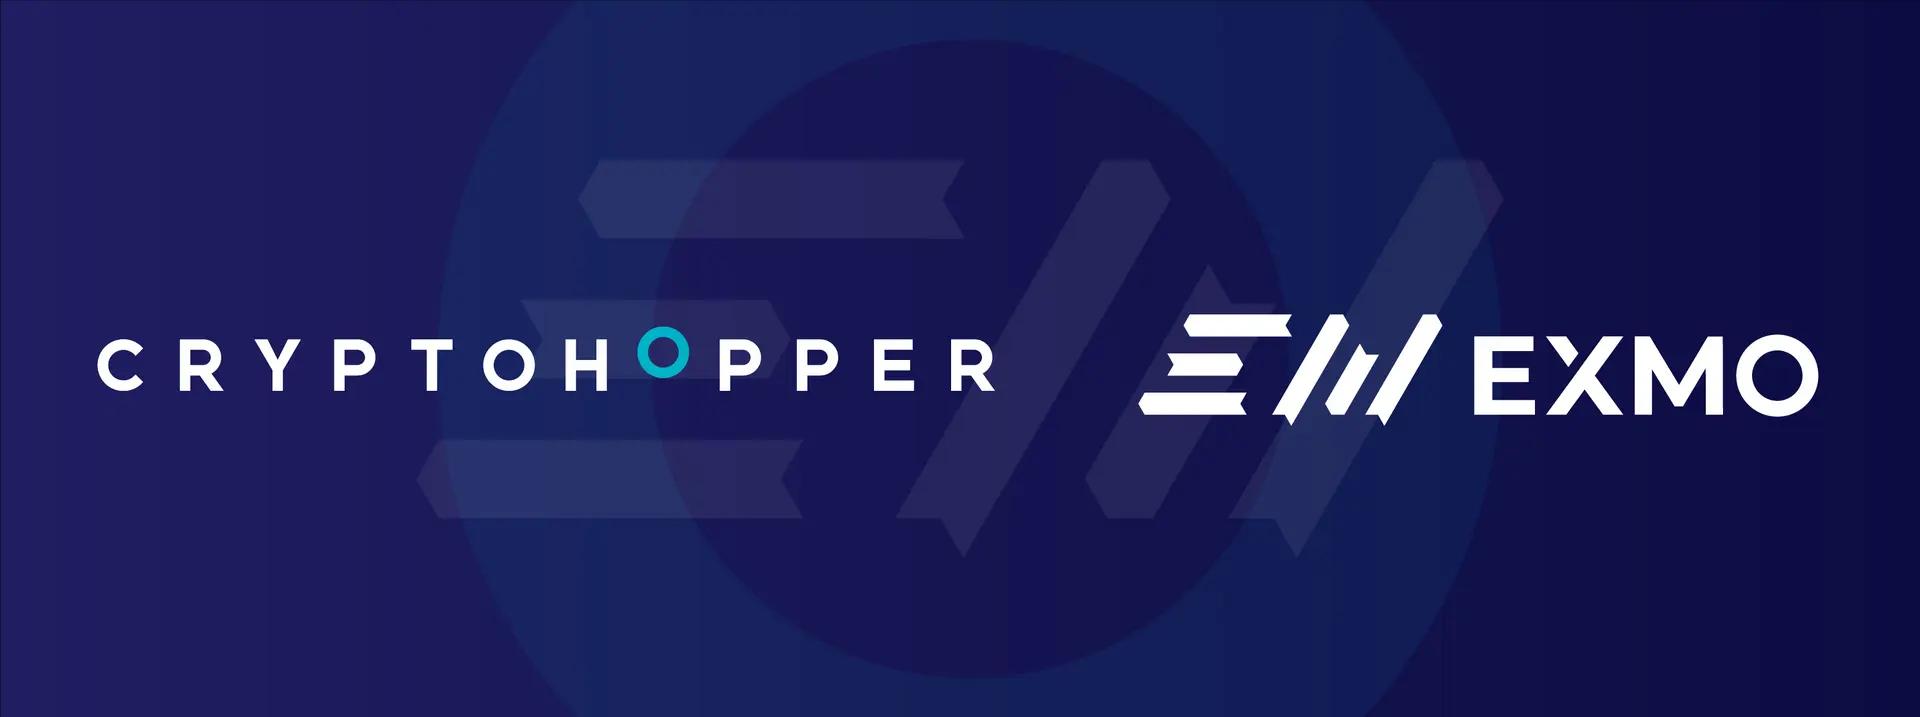 EXMO Partners with Cryptohopper to Provide Users With Utmost trading experience